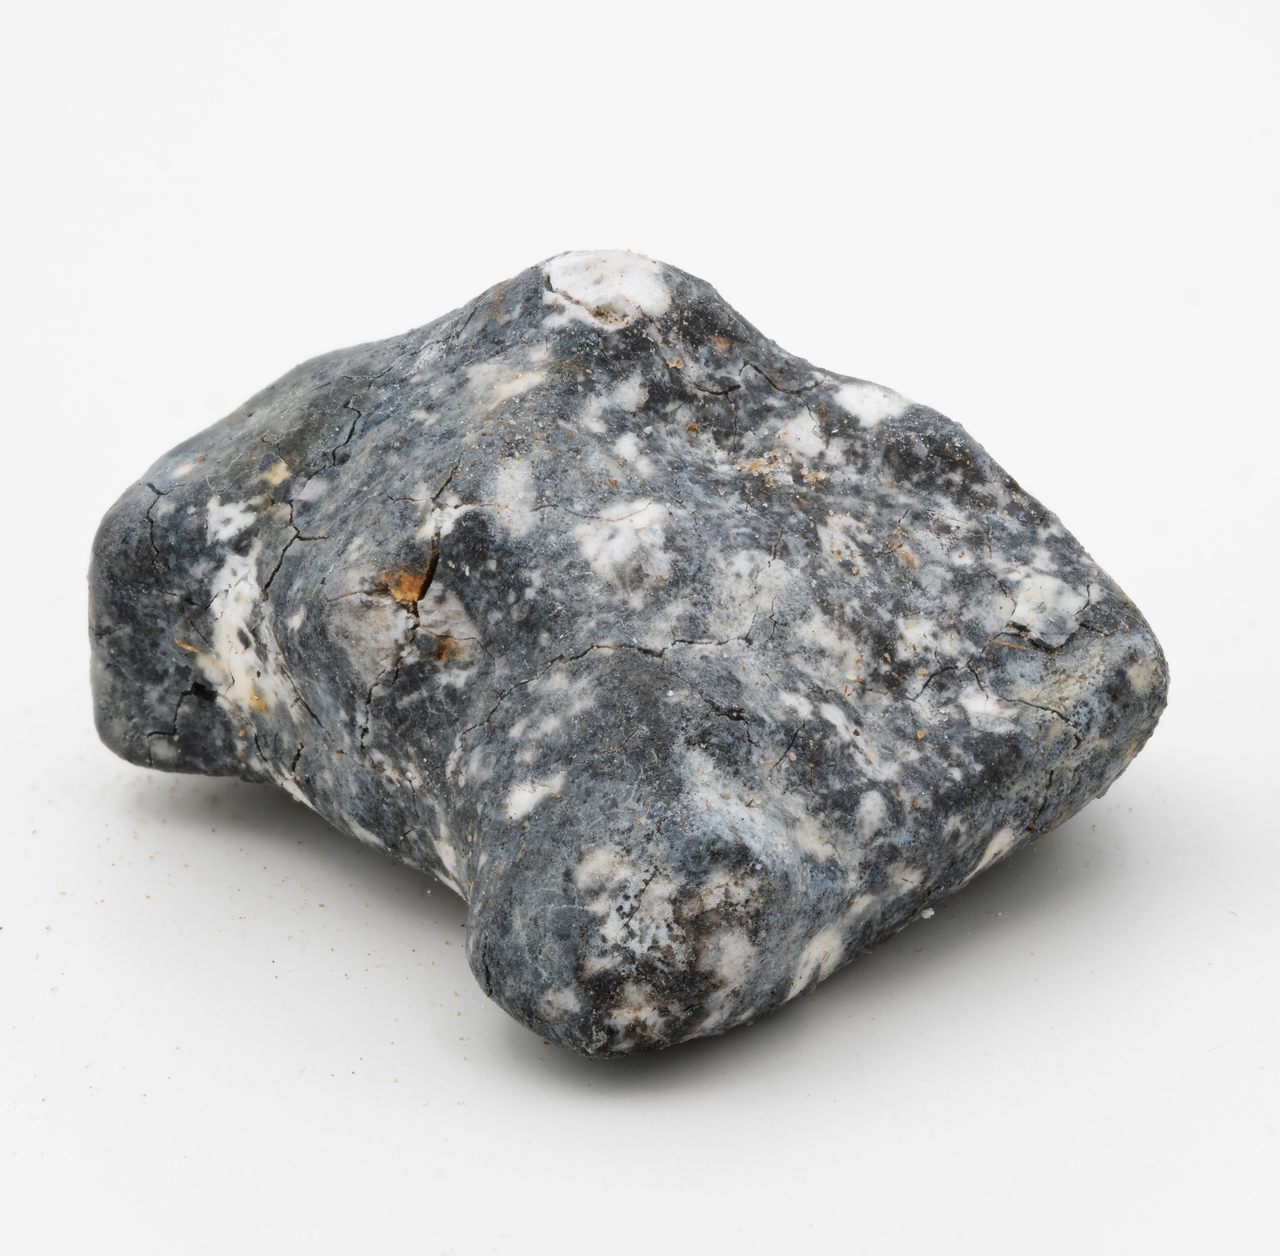 Aubrite meteorite from asteroid 2024 BX1, found by Laura Kranich near the village of Ribbeck, Germany.